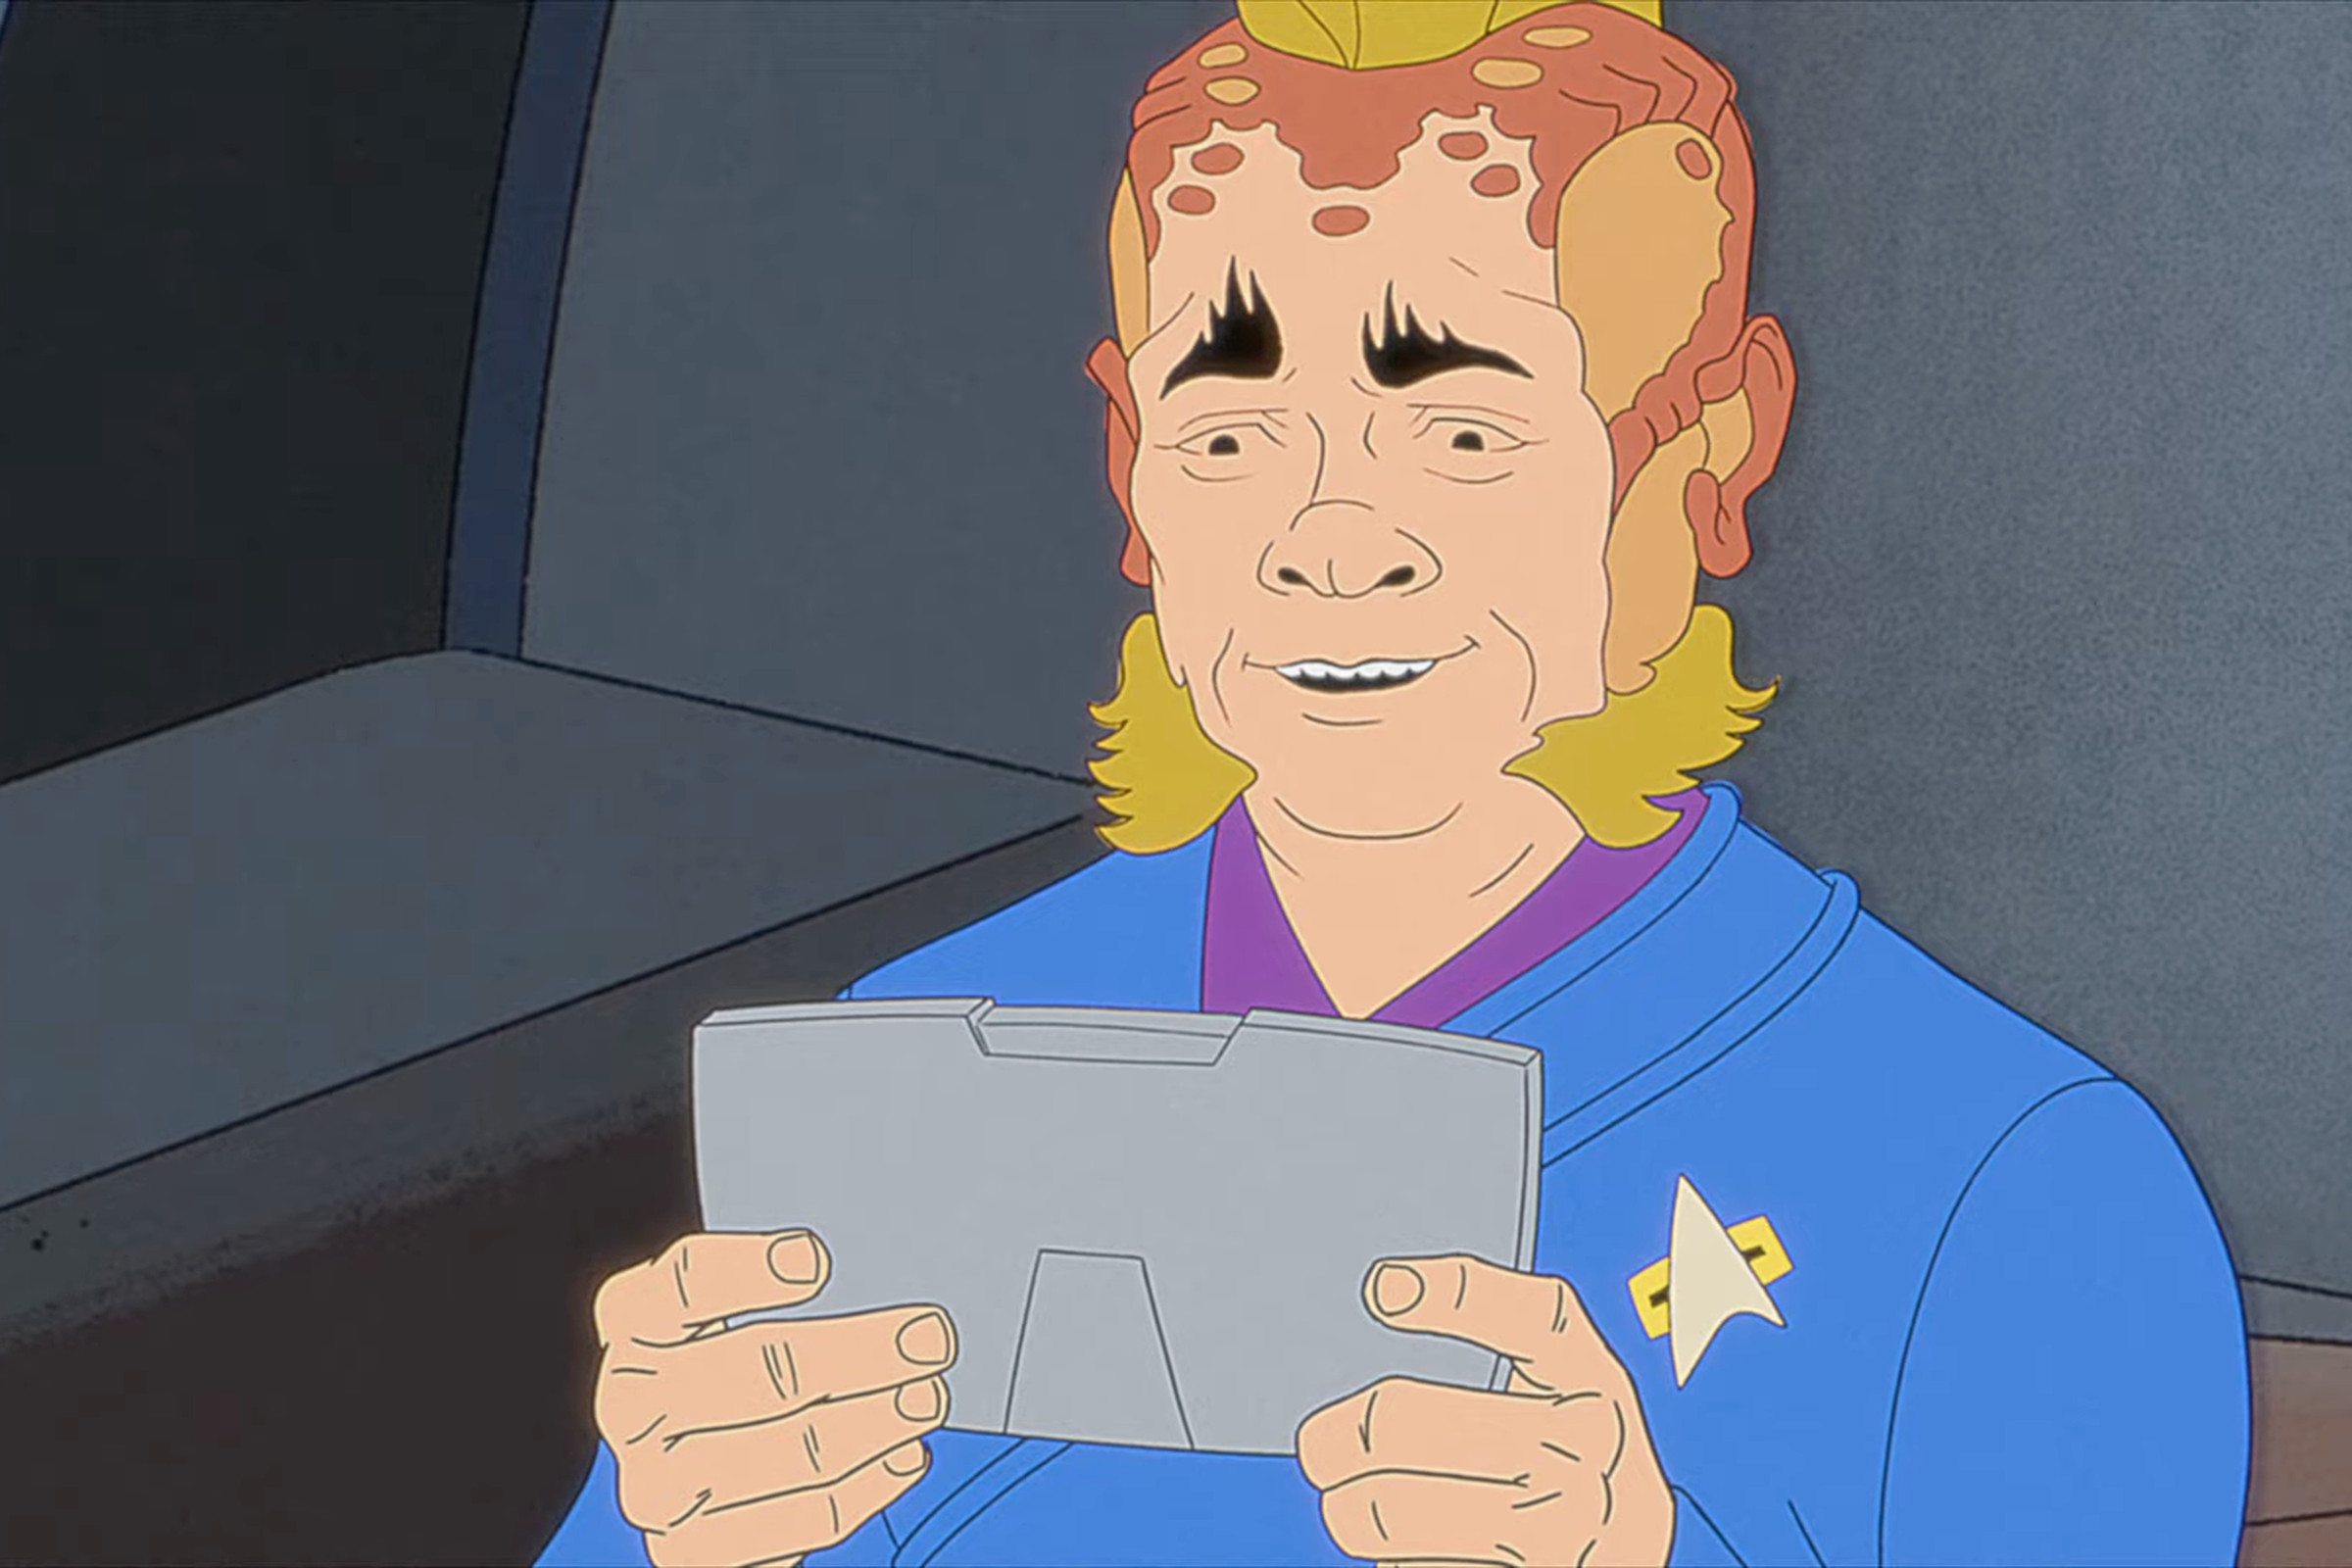 Clip from “very Short Treks” depicting an animated Neelix